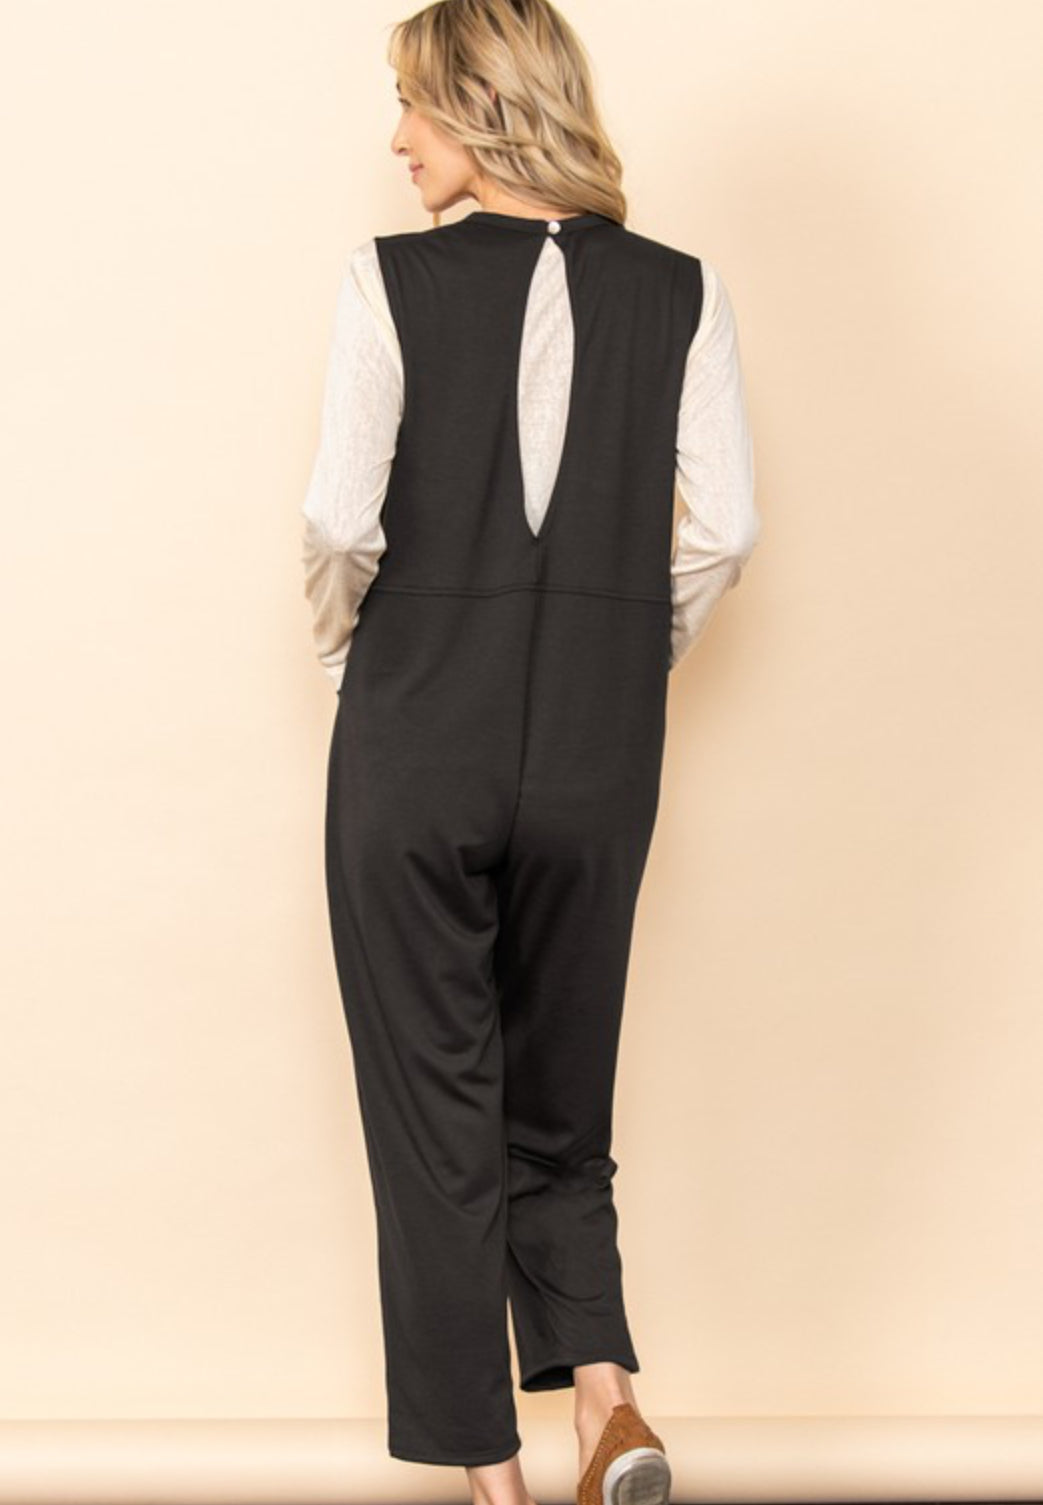 French Terry Jemper Jumpsuit